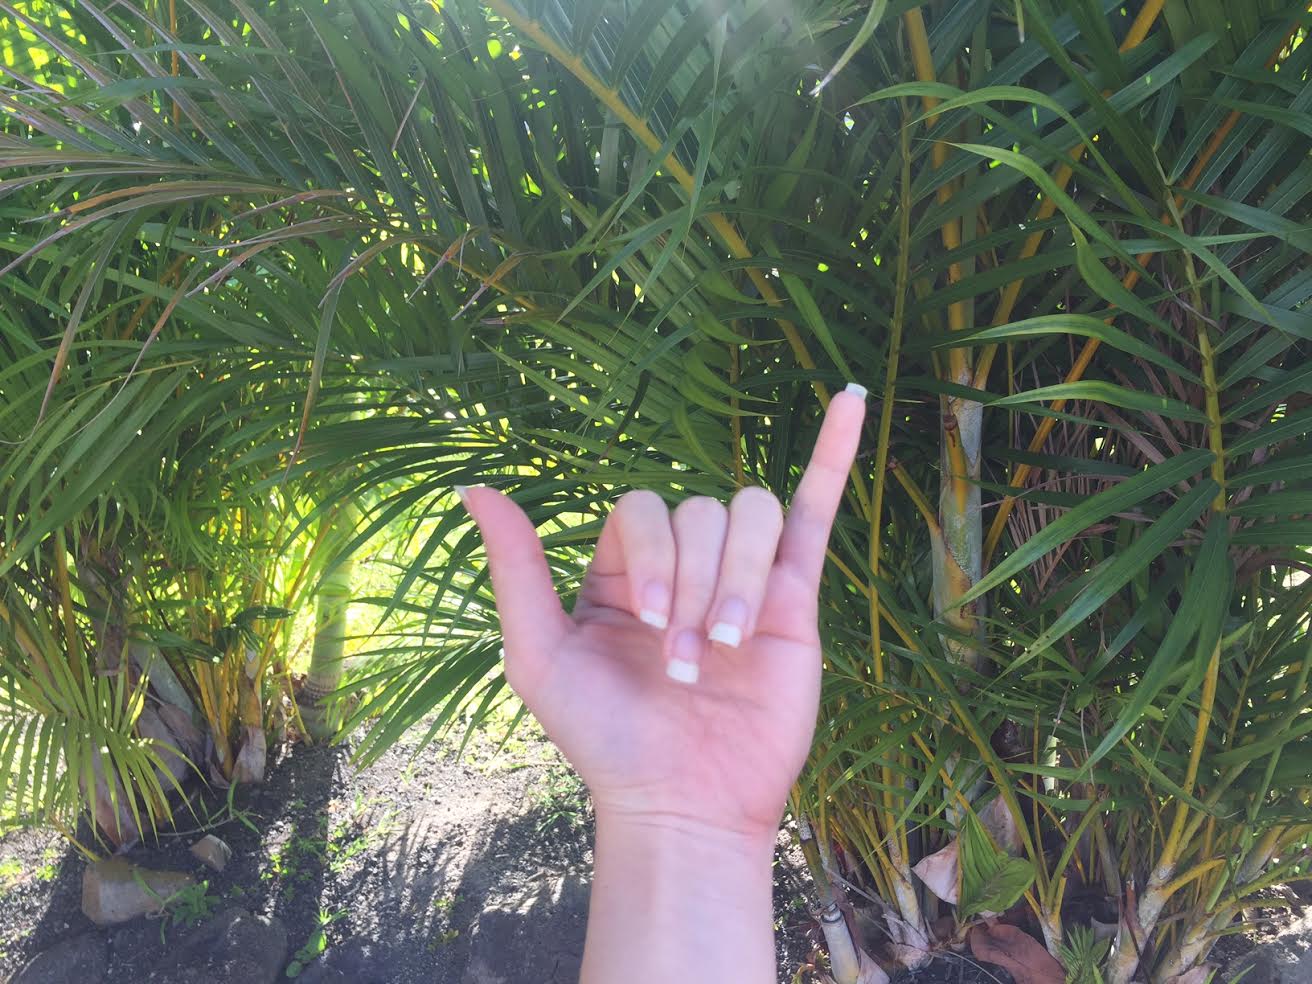 Throw a shaka to those who are local and think theyre local.